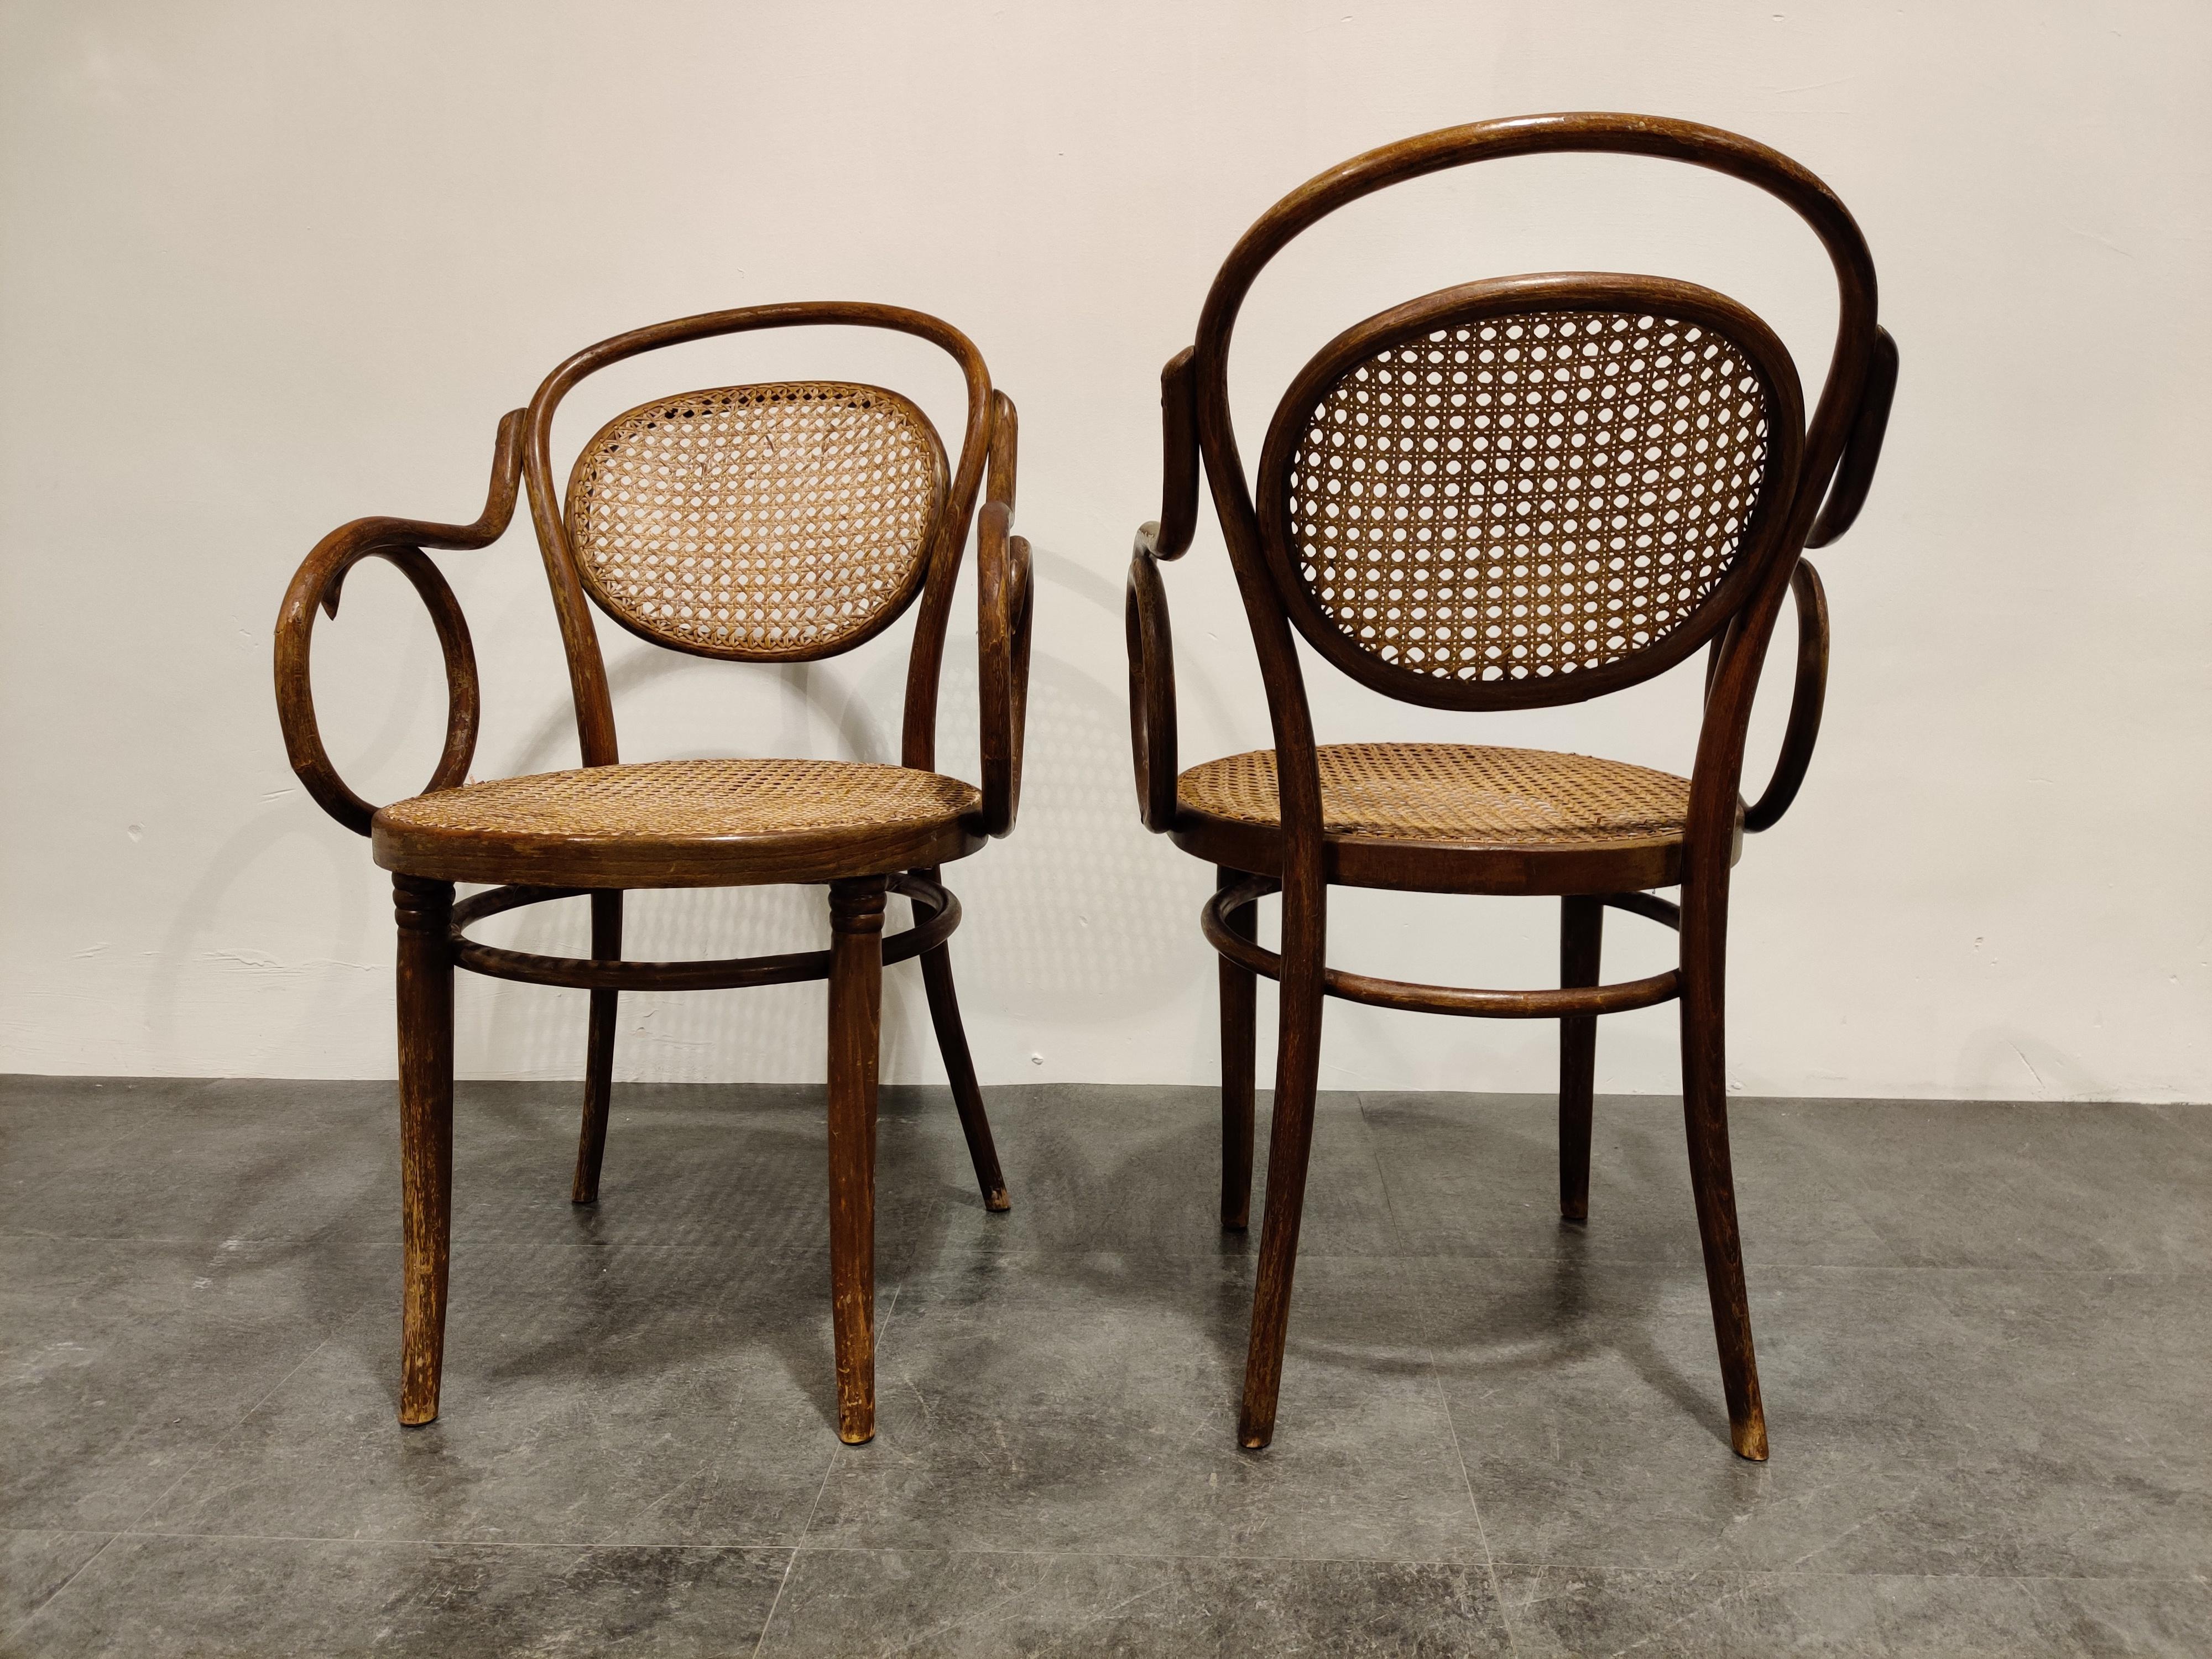 Polish Pair of Bentwood Armchairs by ZPM Radomsko, 1920s